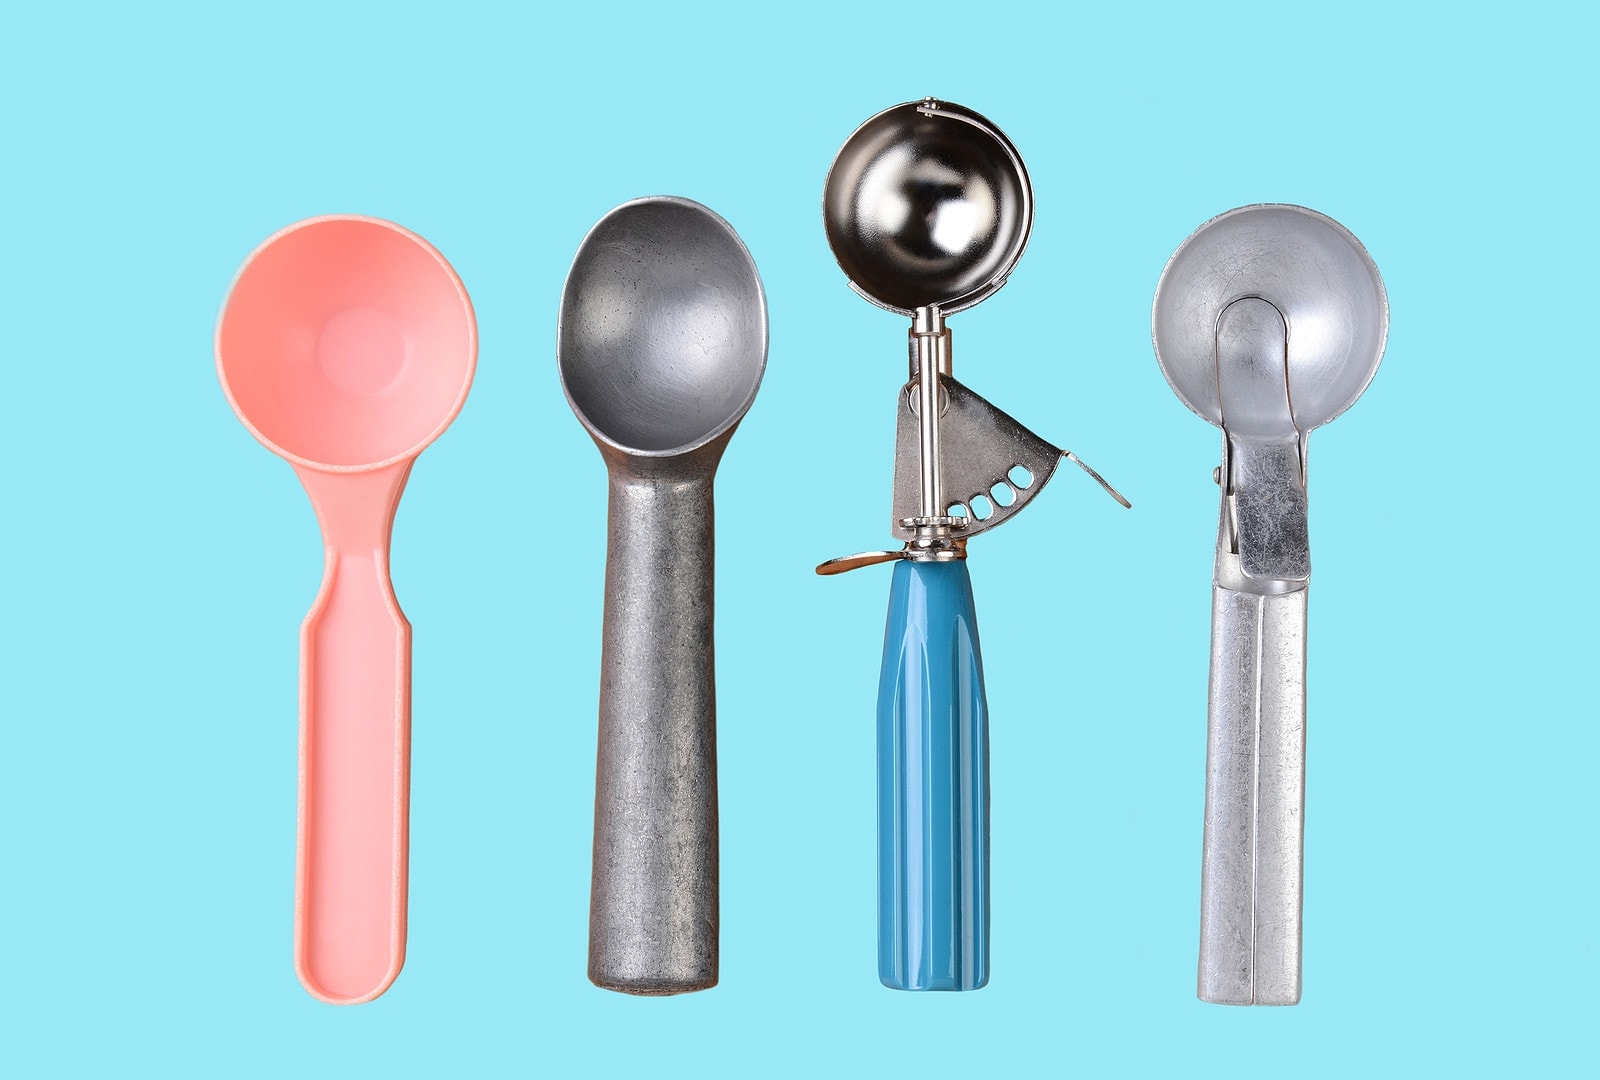 Easy to Release Perfect Ice Cream Balls-Small Jungchiali Ice Cream Scoop with Trigger by Plolished Smooth Surface and Premium Stainless Steel 